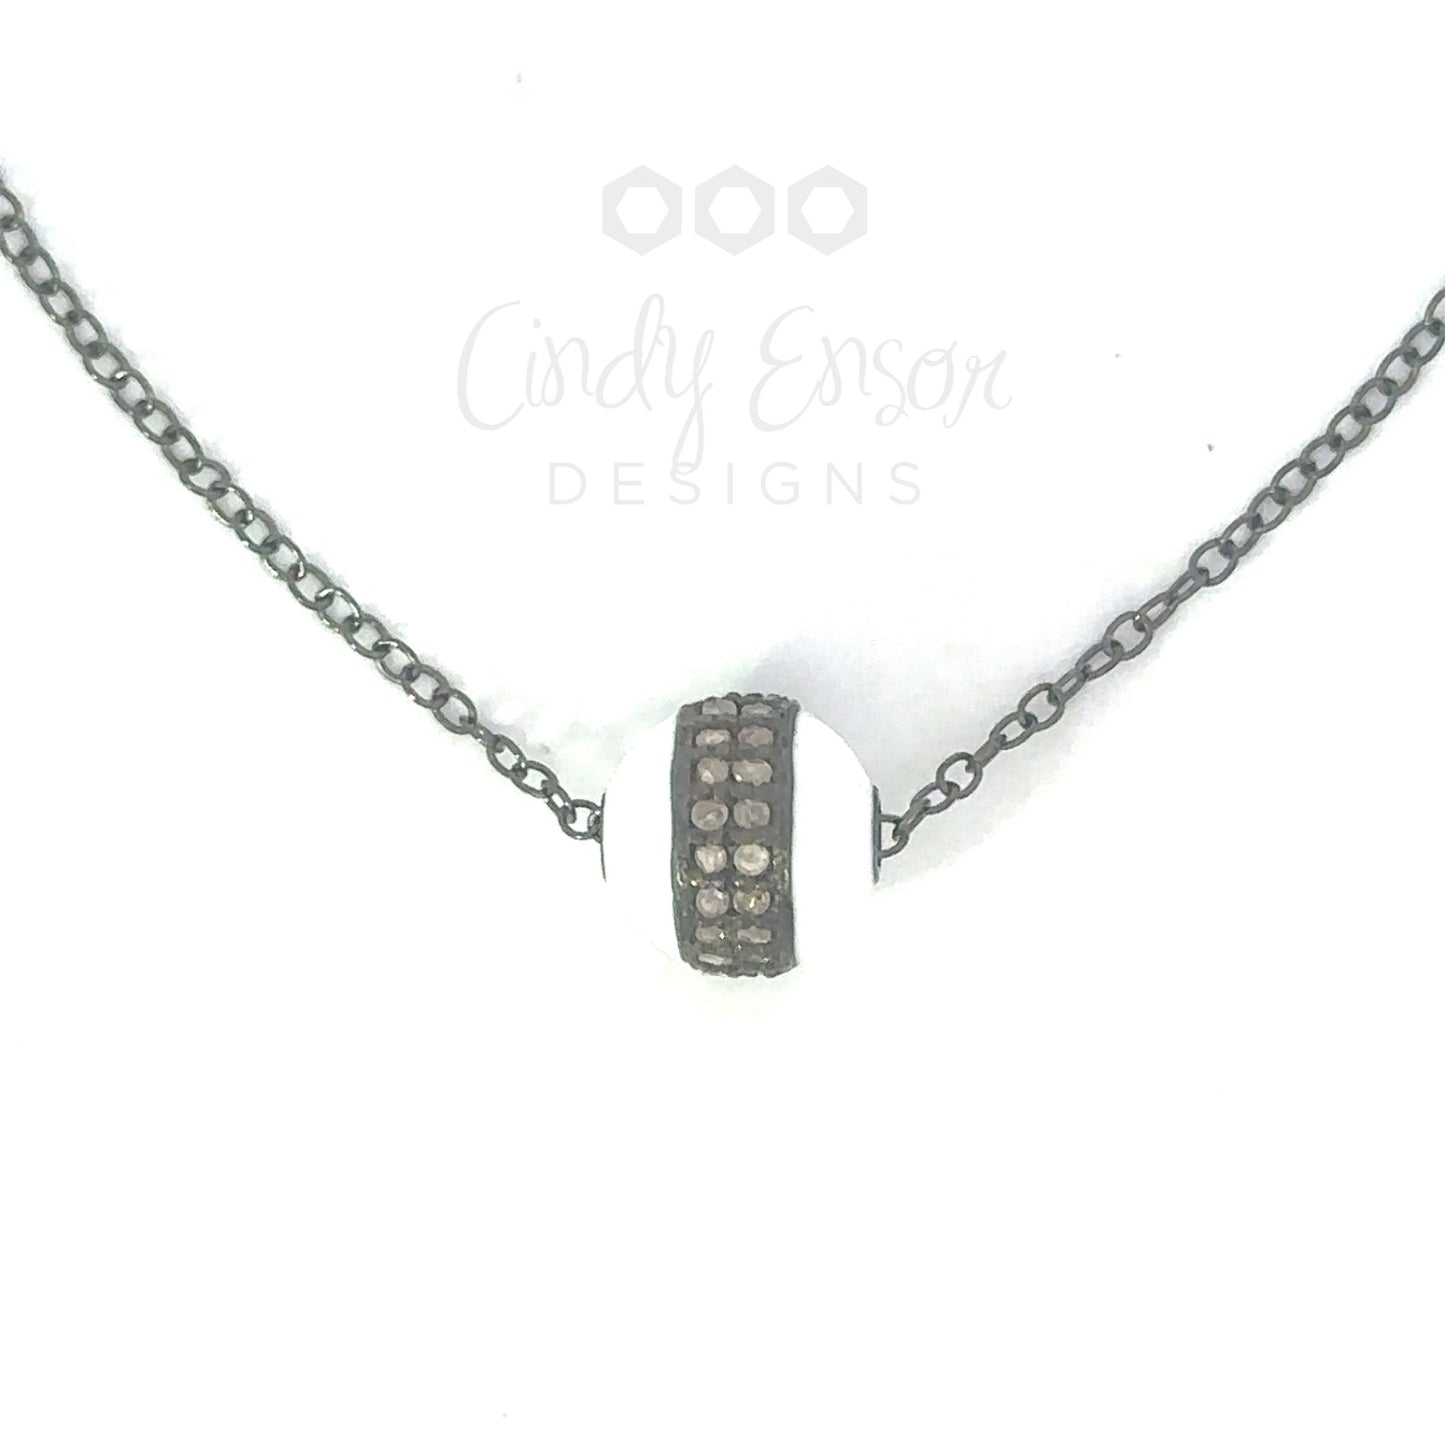 8mm Enamel and Pave Diamond Bead Necklace